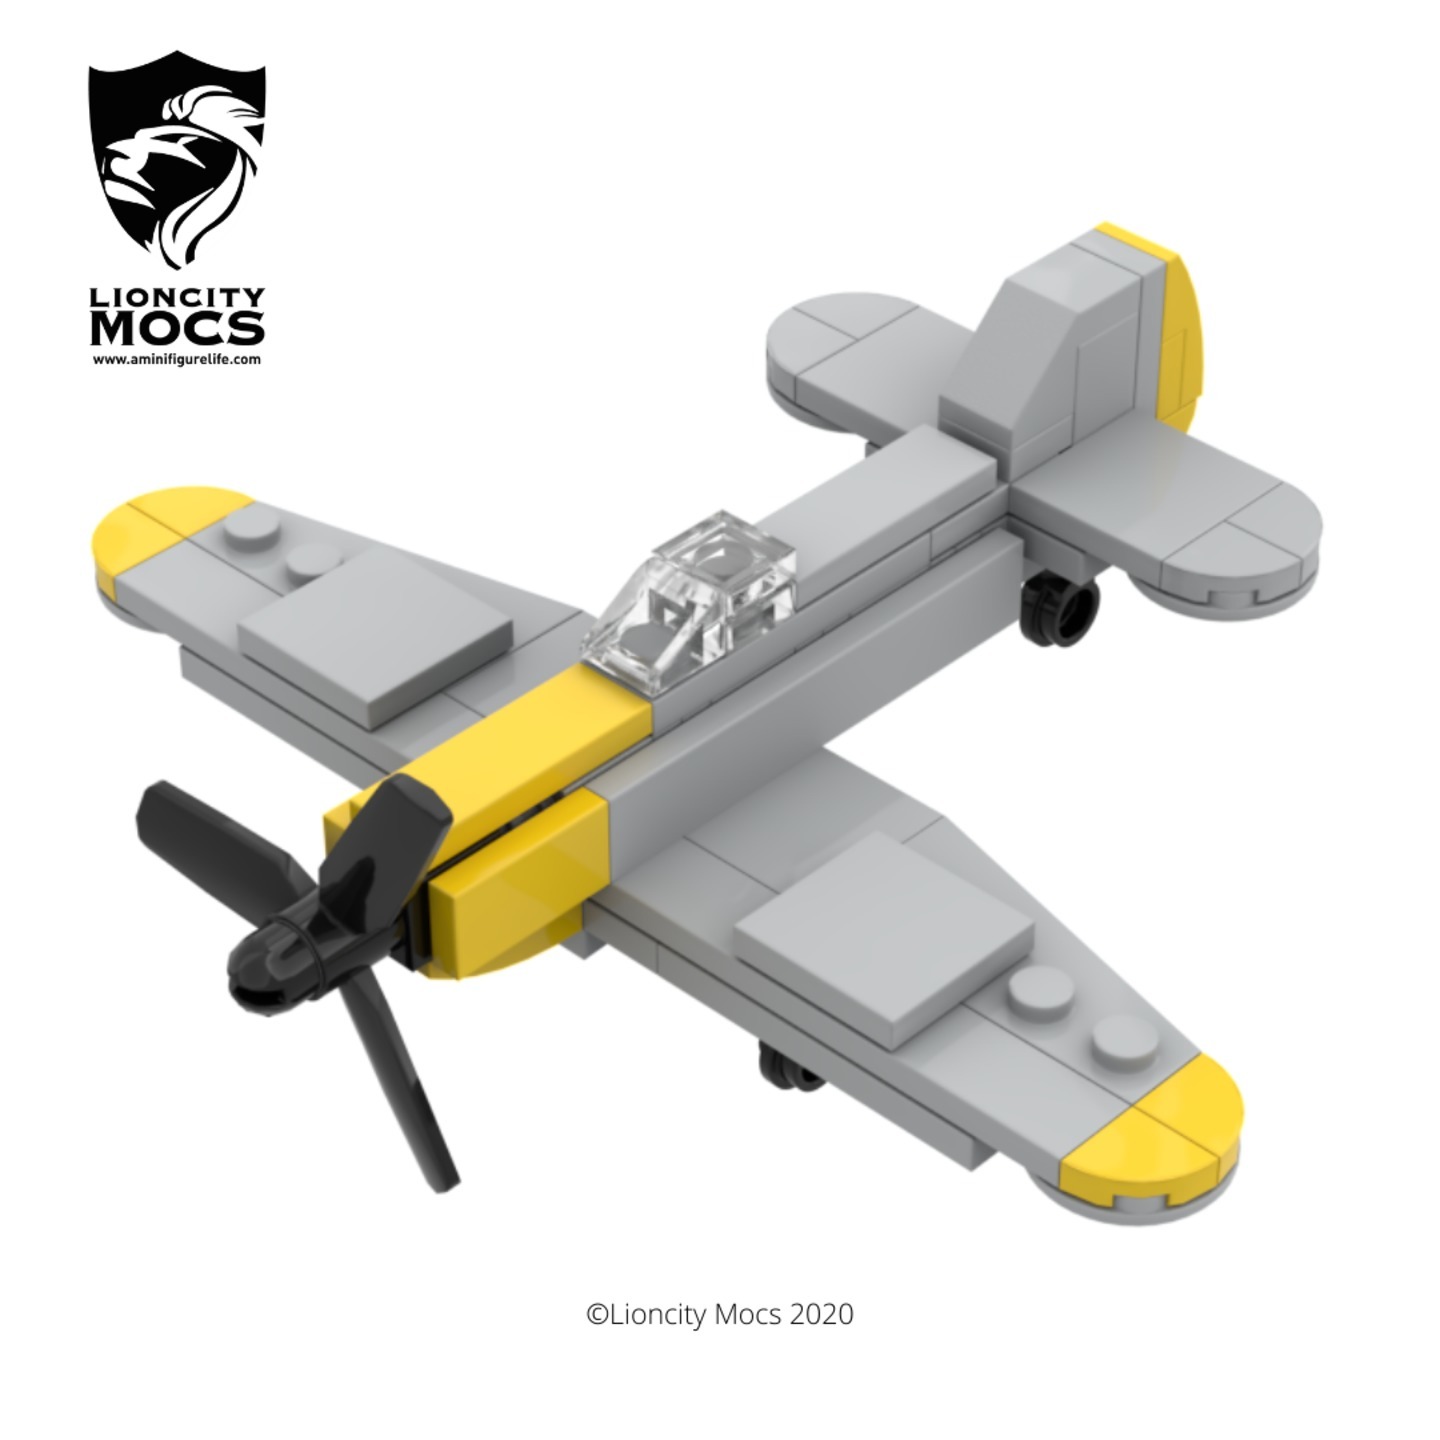 [PDF Instructions Only] Bf-109 WWII Mini Aircraft